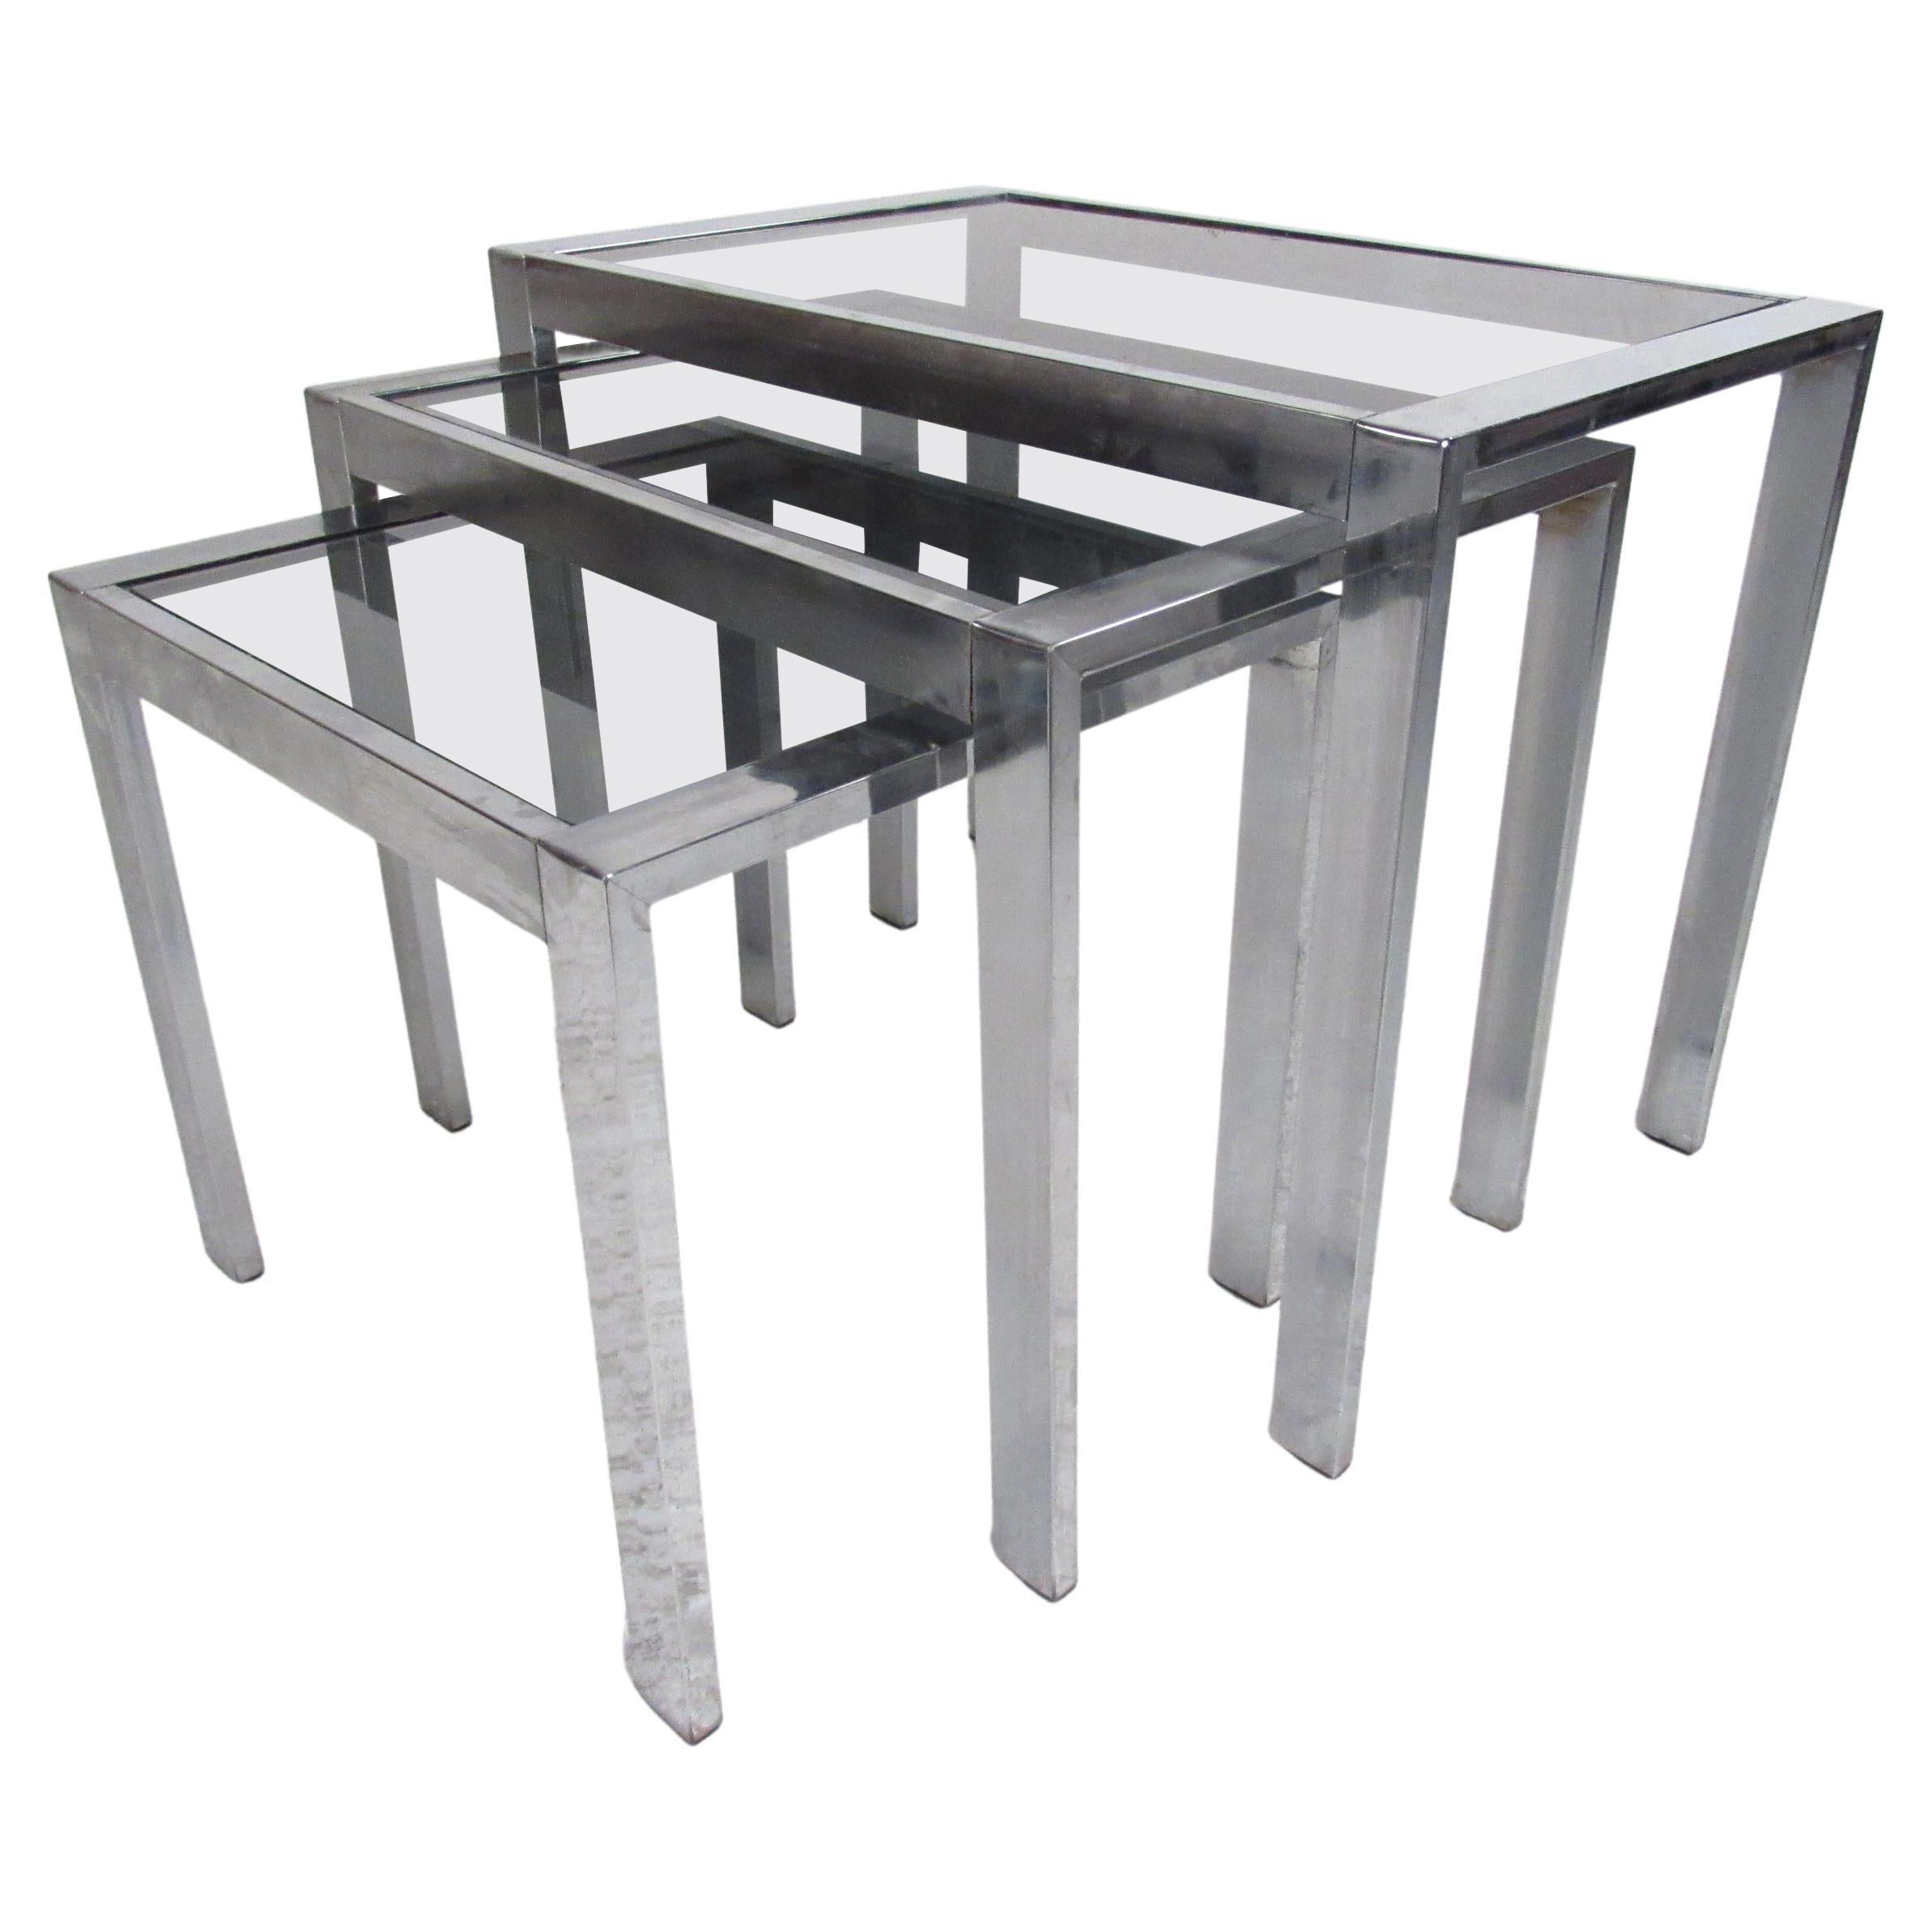 VIntage Modern Metal and Glass Nesting Tables